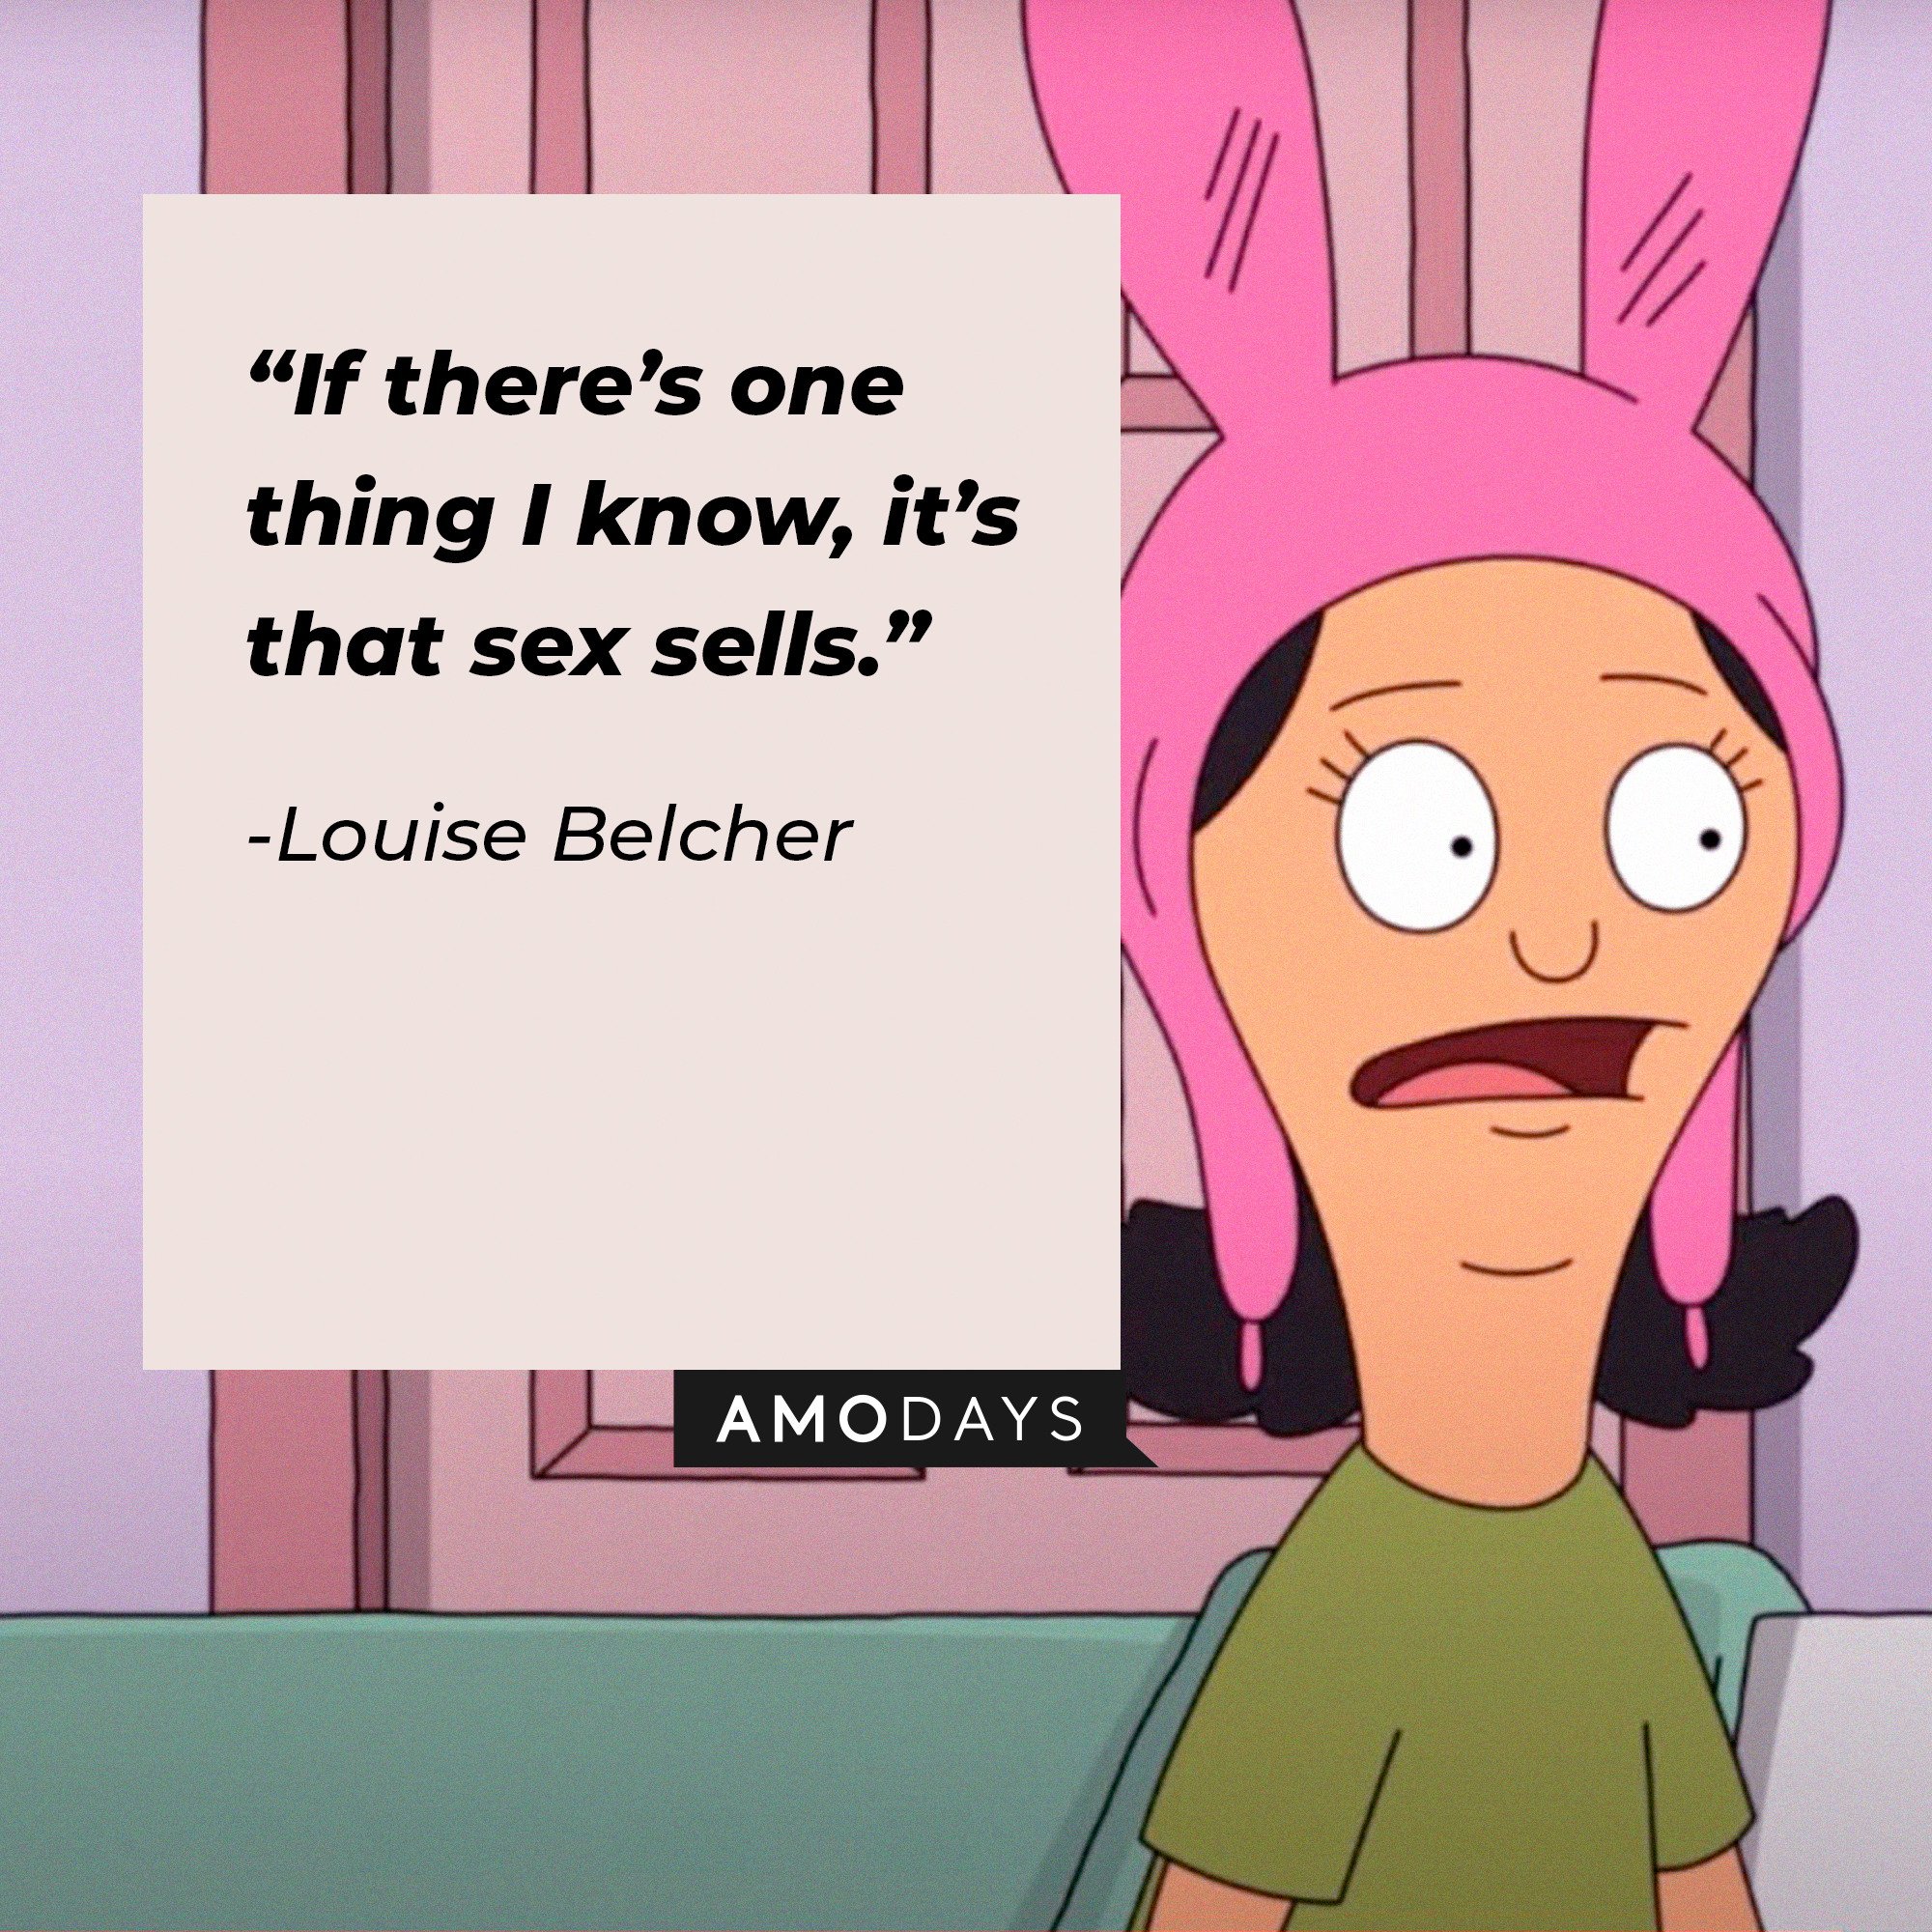 An image of Louise Belcher with her quote: “If there’s one thing I know, it’s that sex sells.” | Source: facebook.com/BobsBurgers